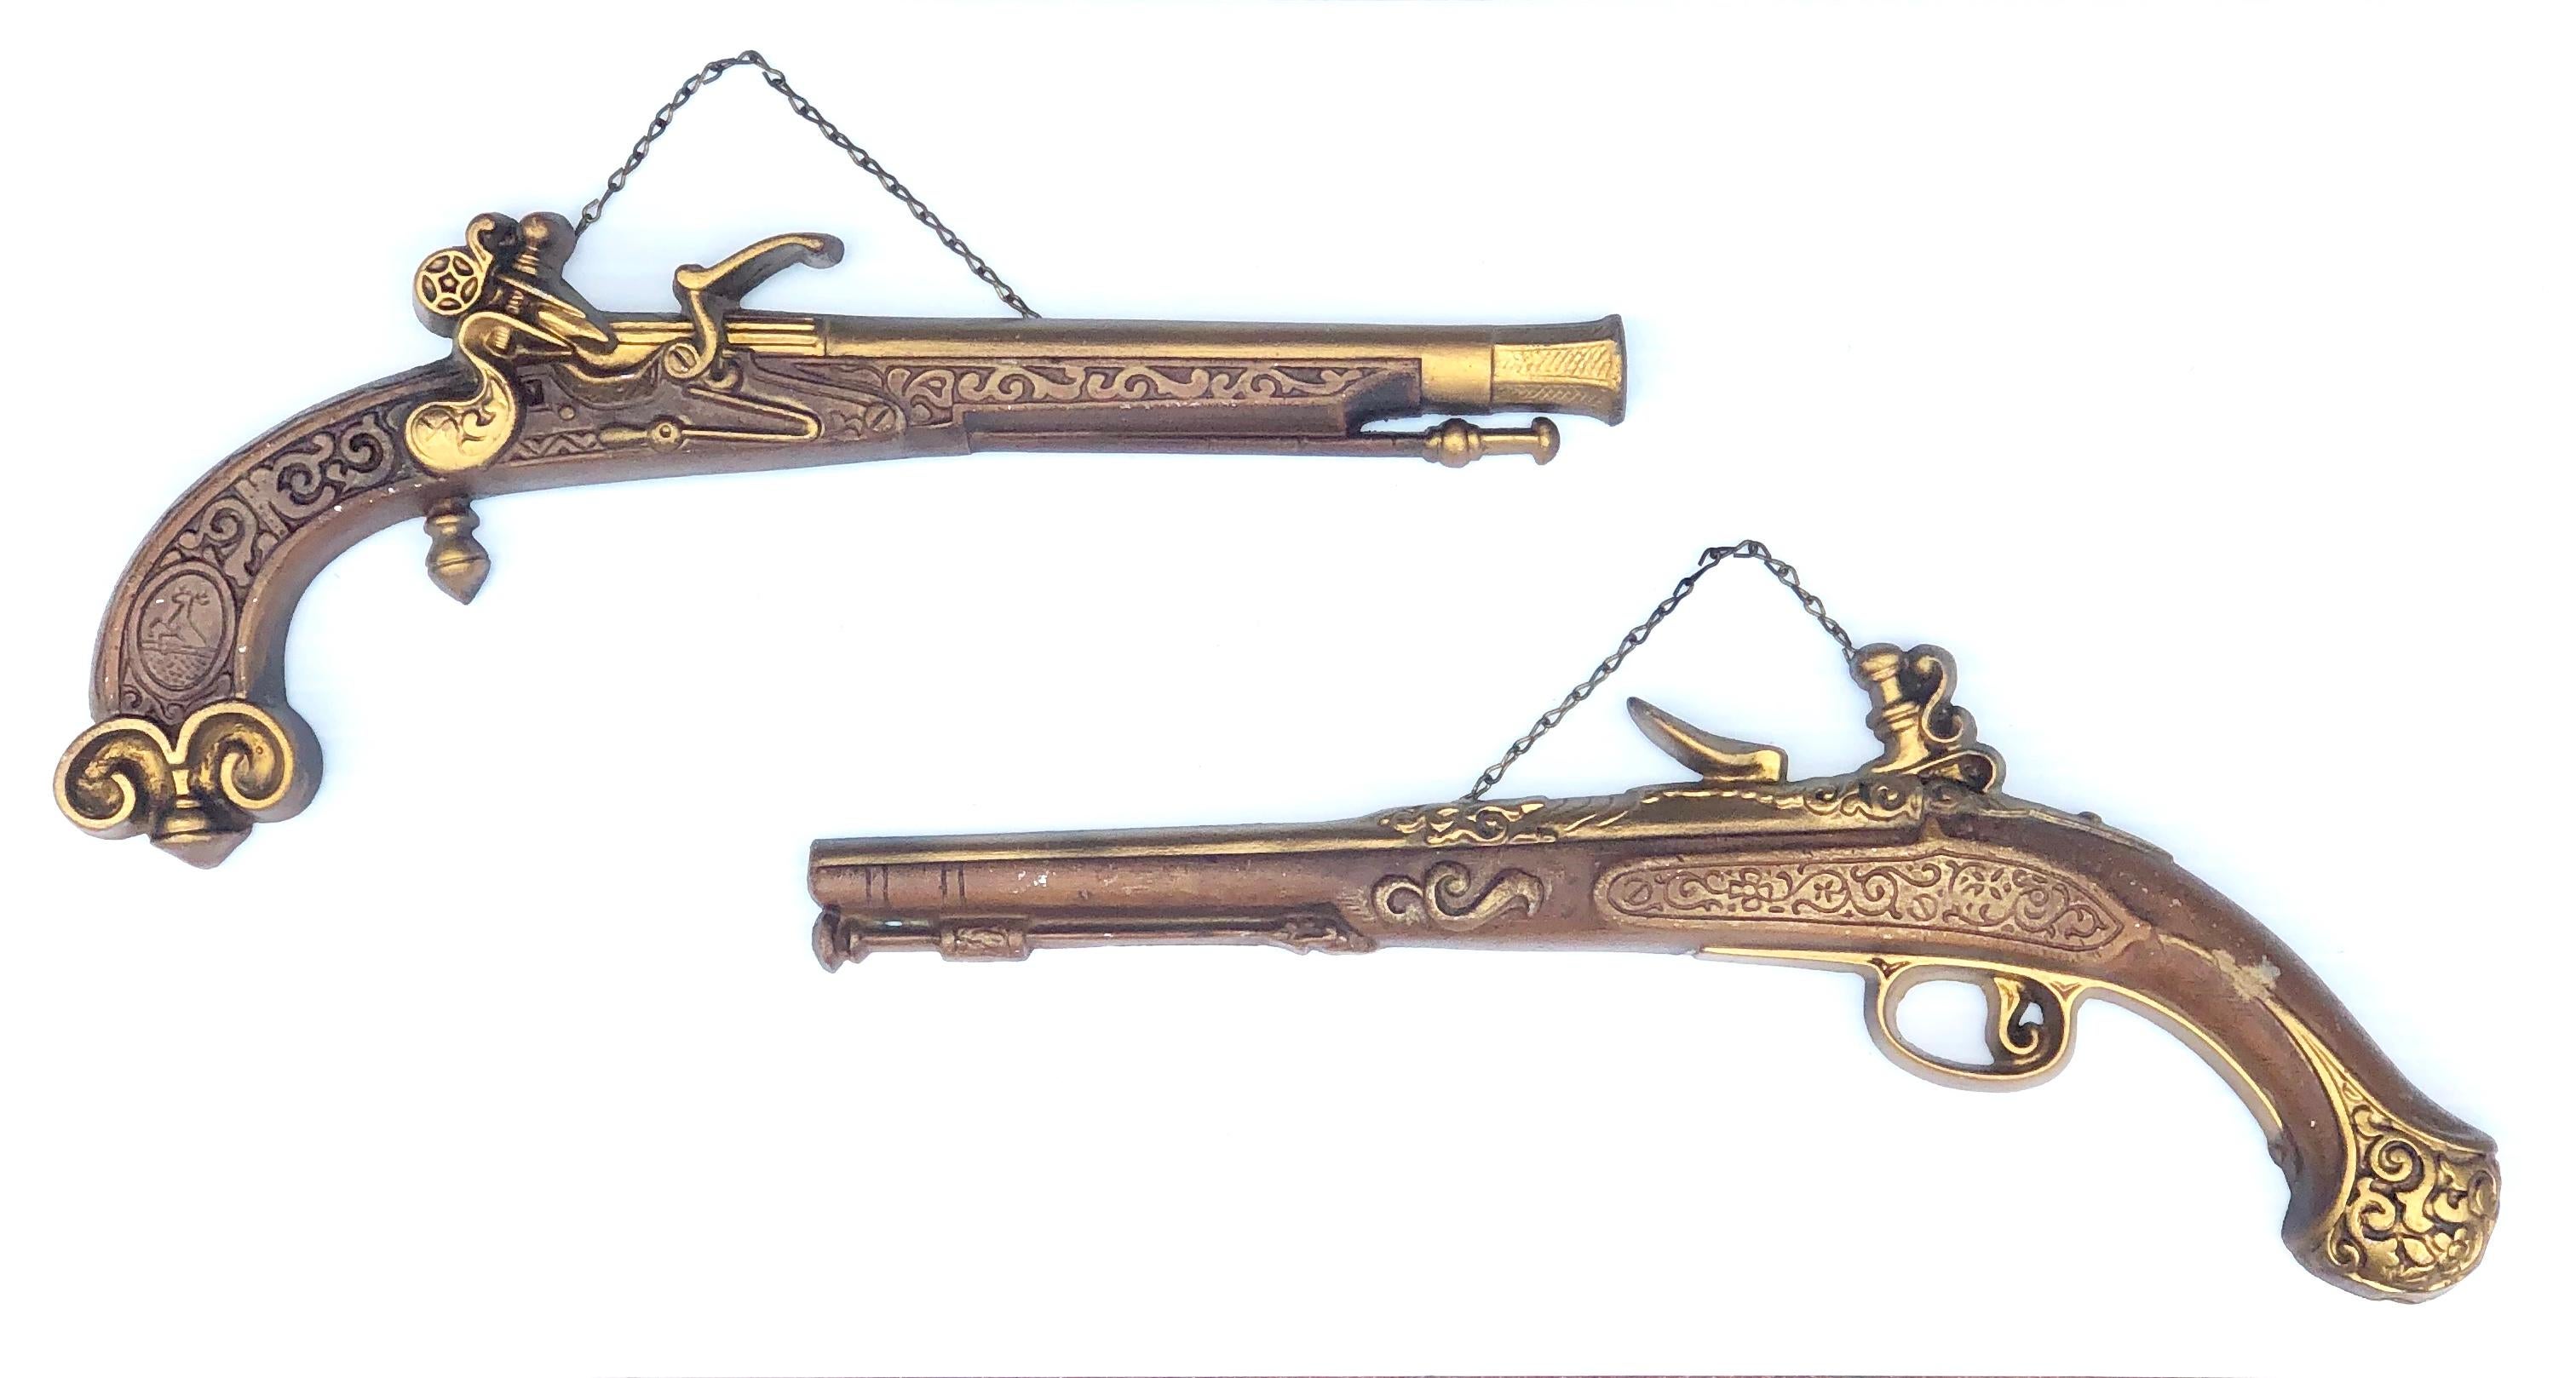 Nice patinated original finish on these pair of antique cast aluminium duelling guns by Sexton. Classic midcentury decorative pieces. In gold and brown finish painted with some scuffs and marks due to age.